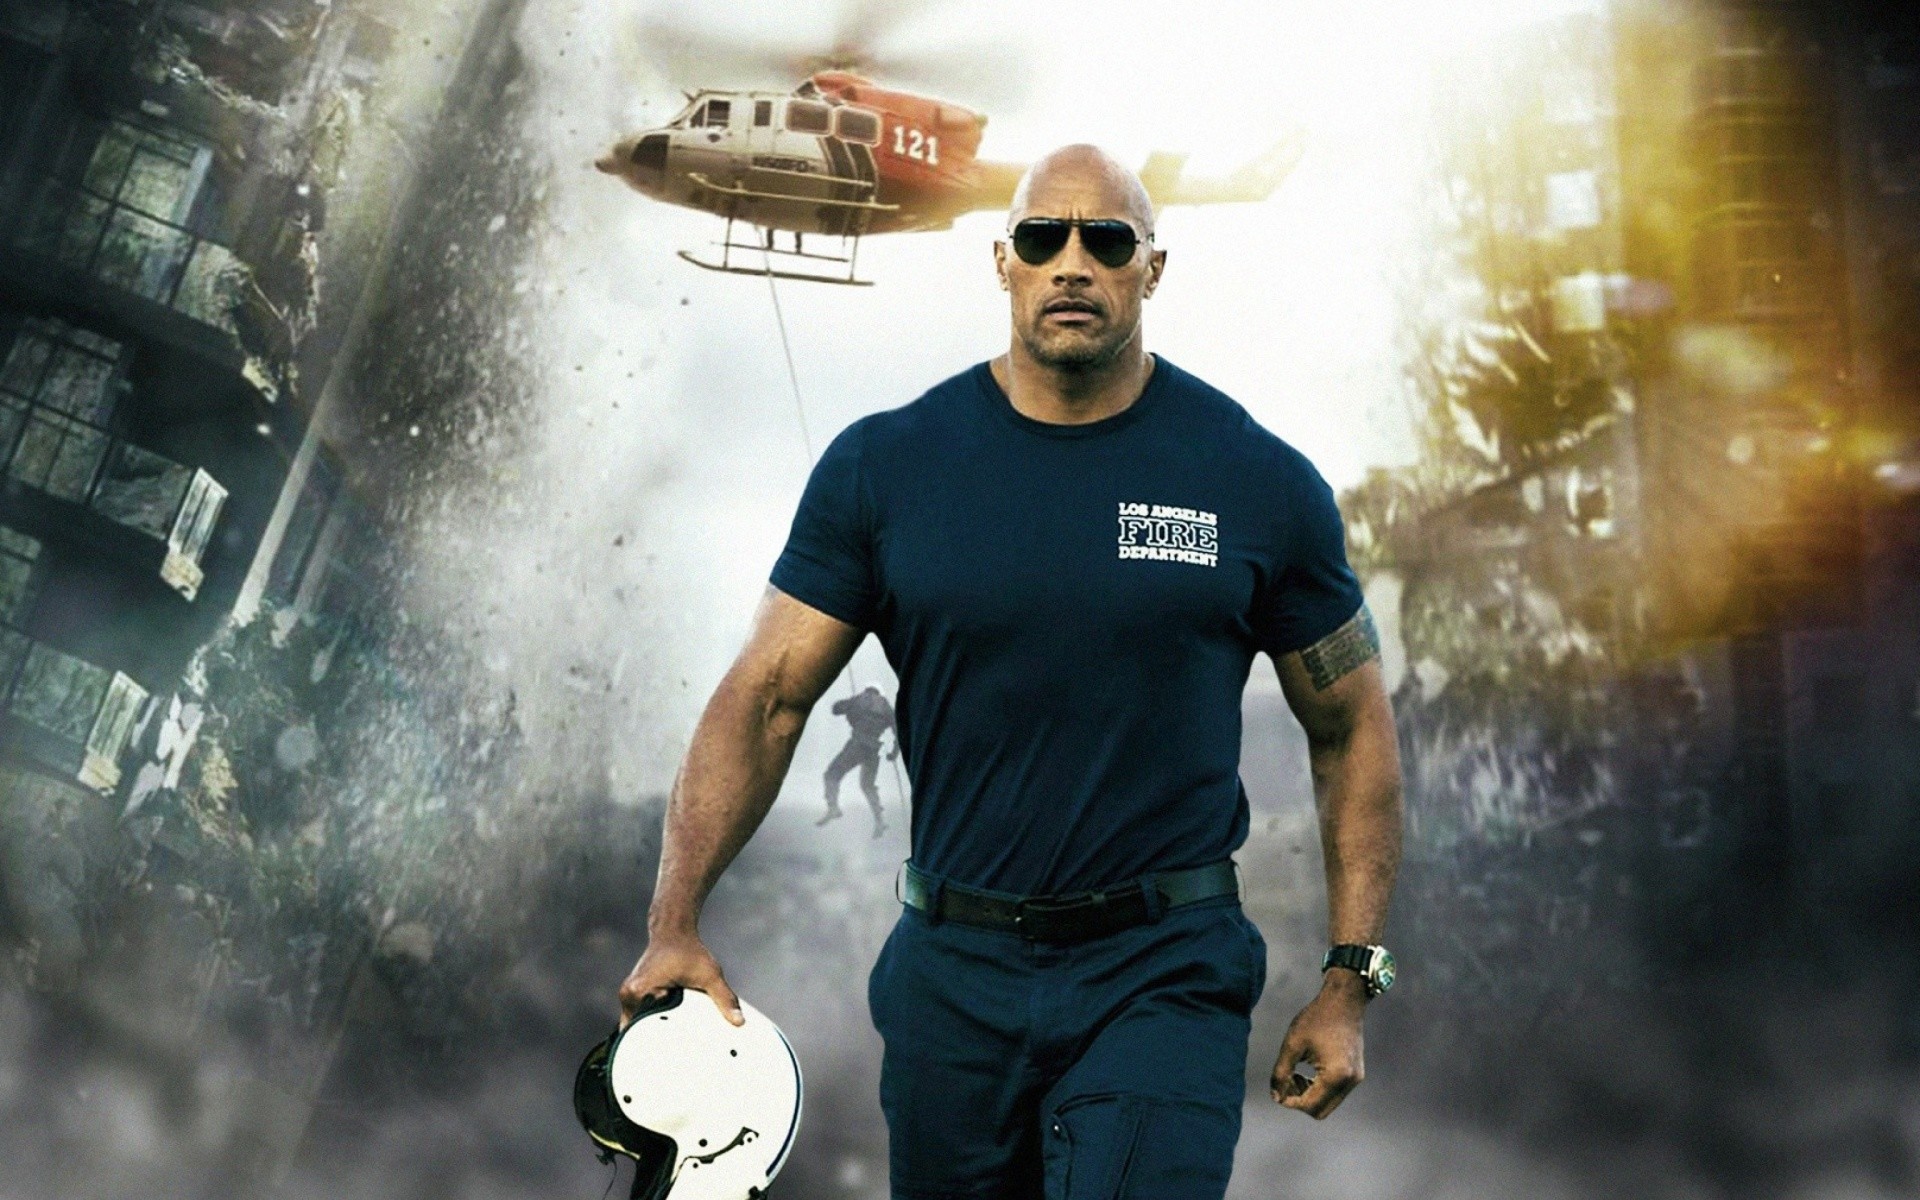 The Rock Movie Wallpapers